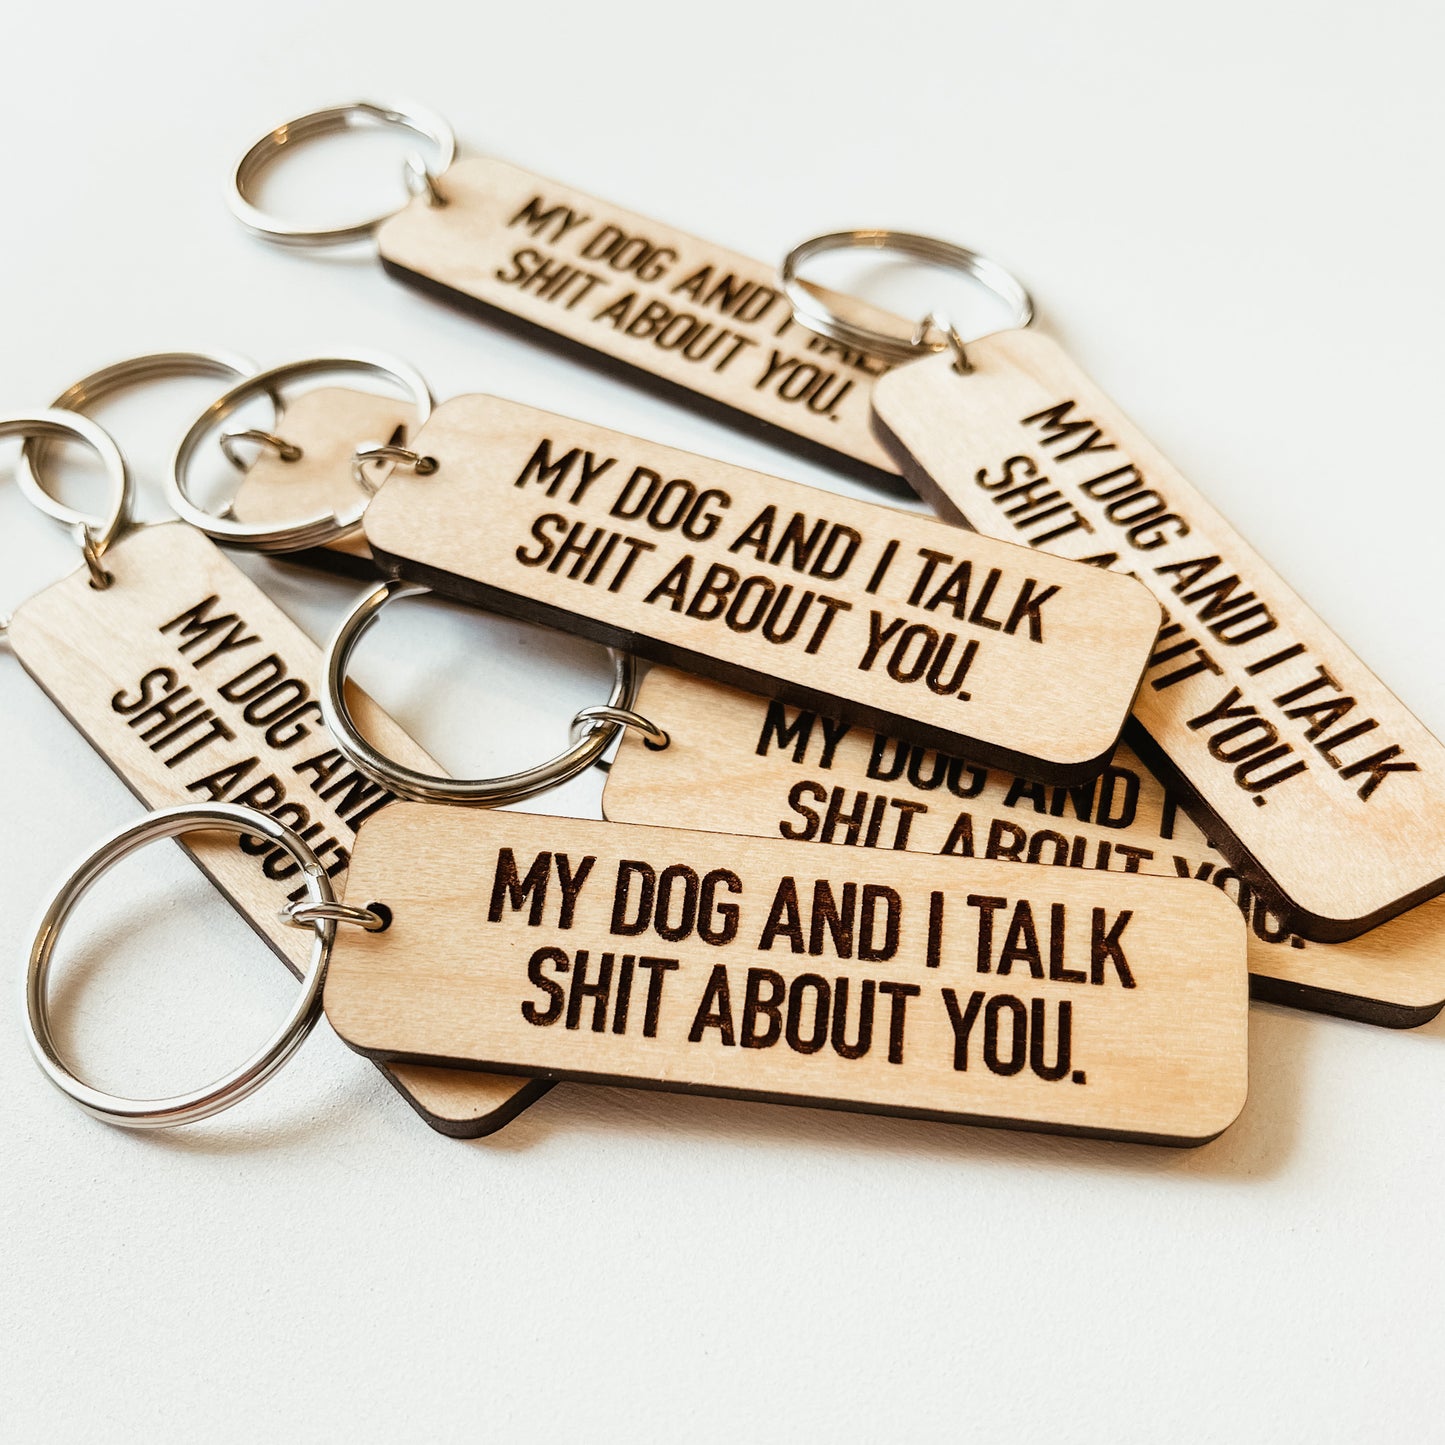 My Dog and I Talk Shit About You Keychain